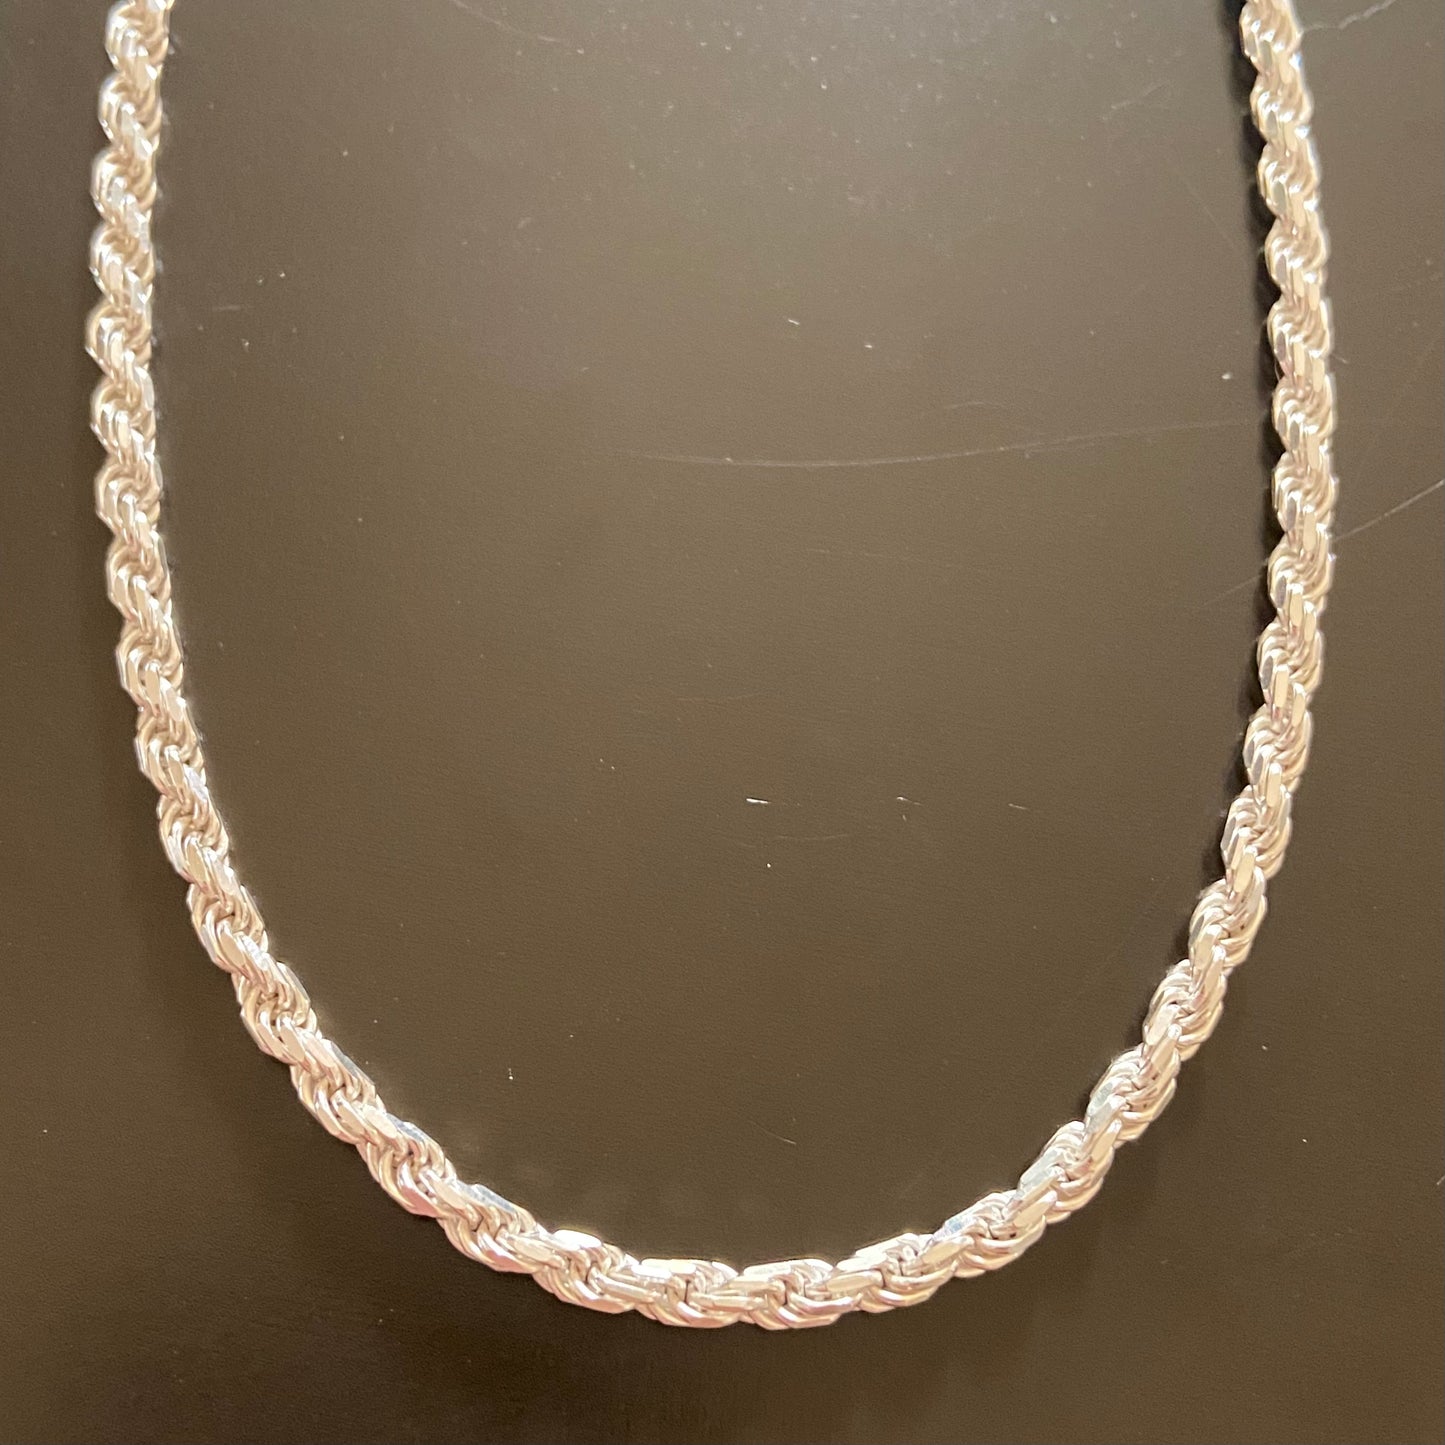 Solid Silver Rope Chain 18in 4mm